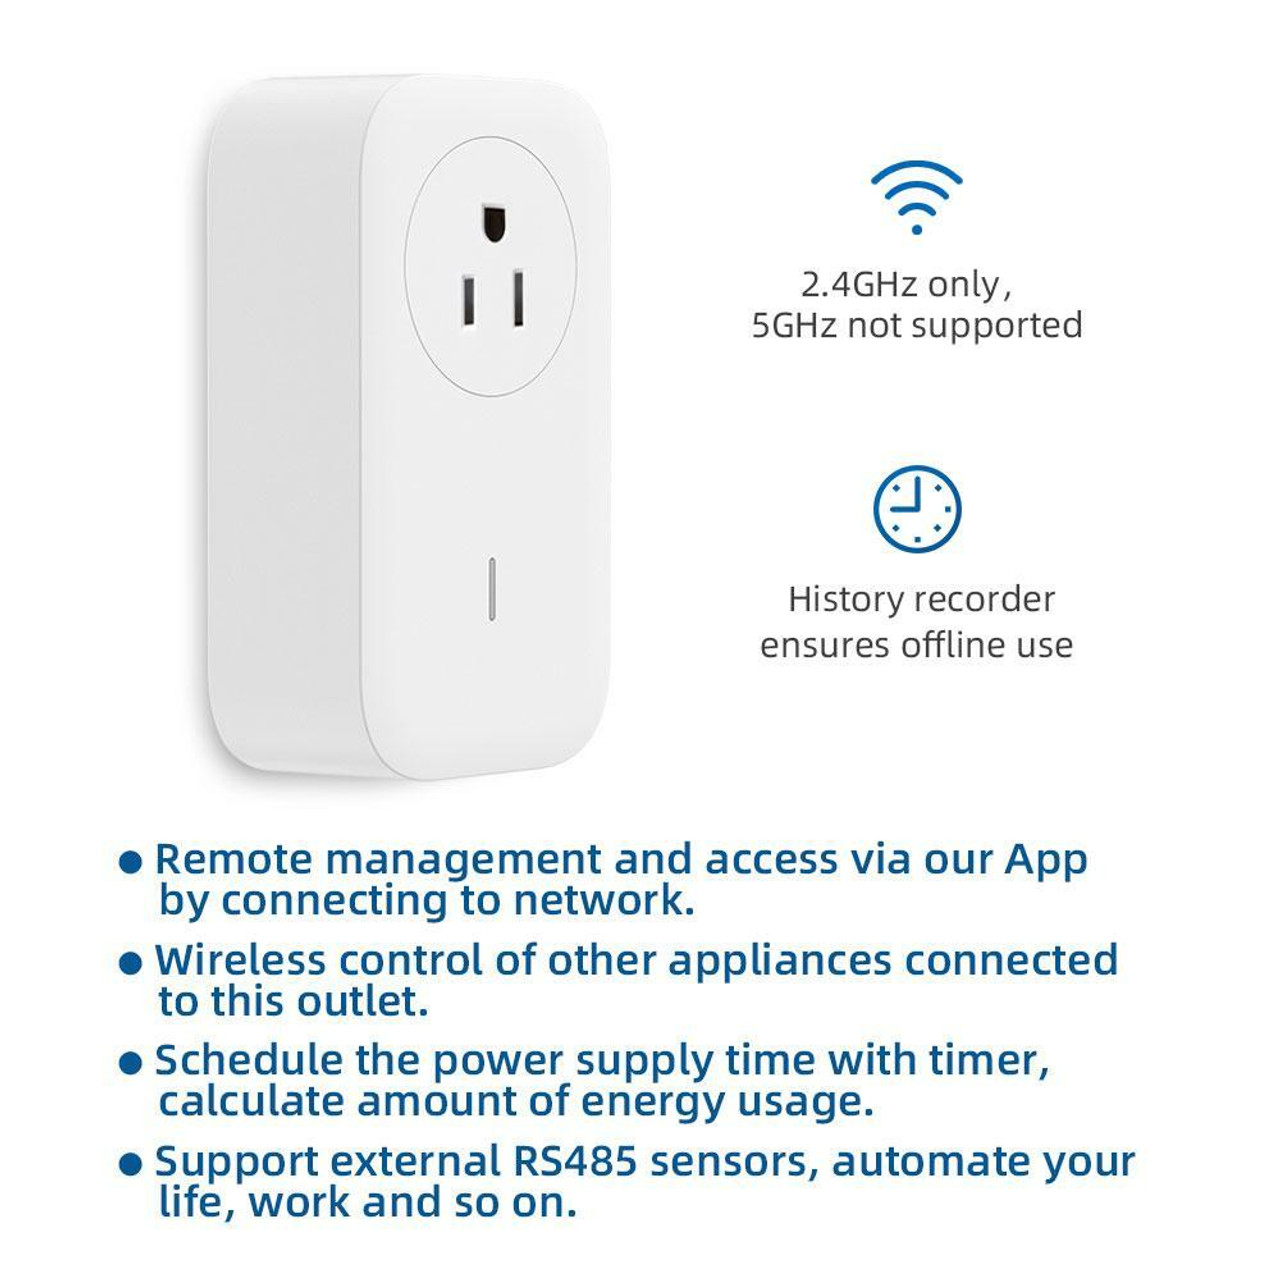 5GHz Smart Plug with Energy Monitoring Smart Plugs that Work with